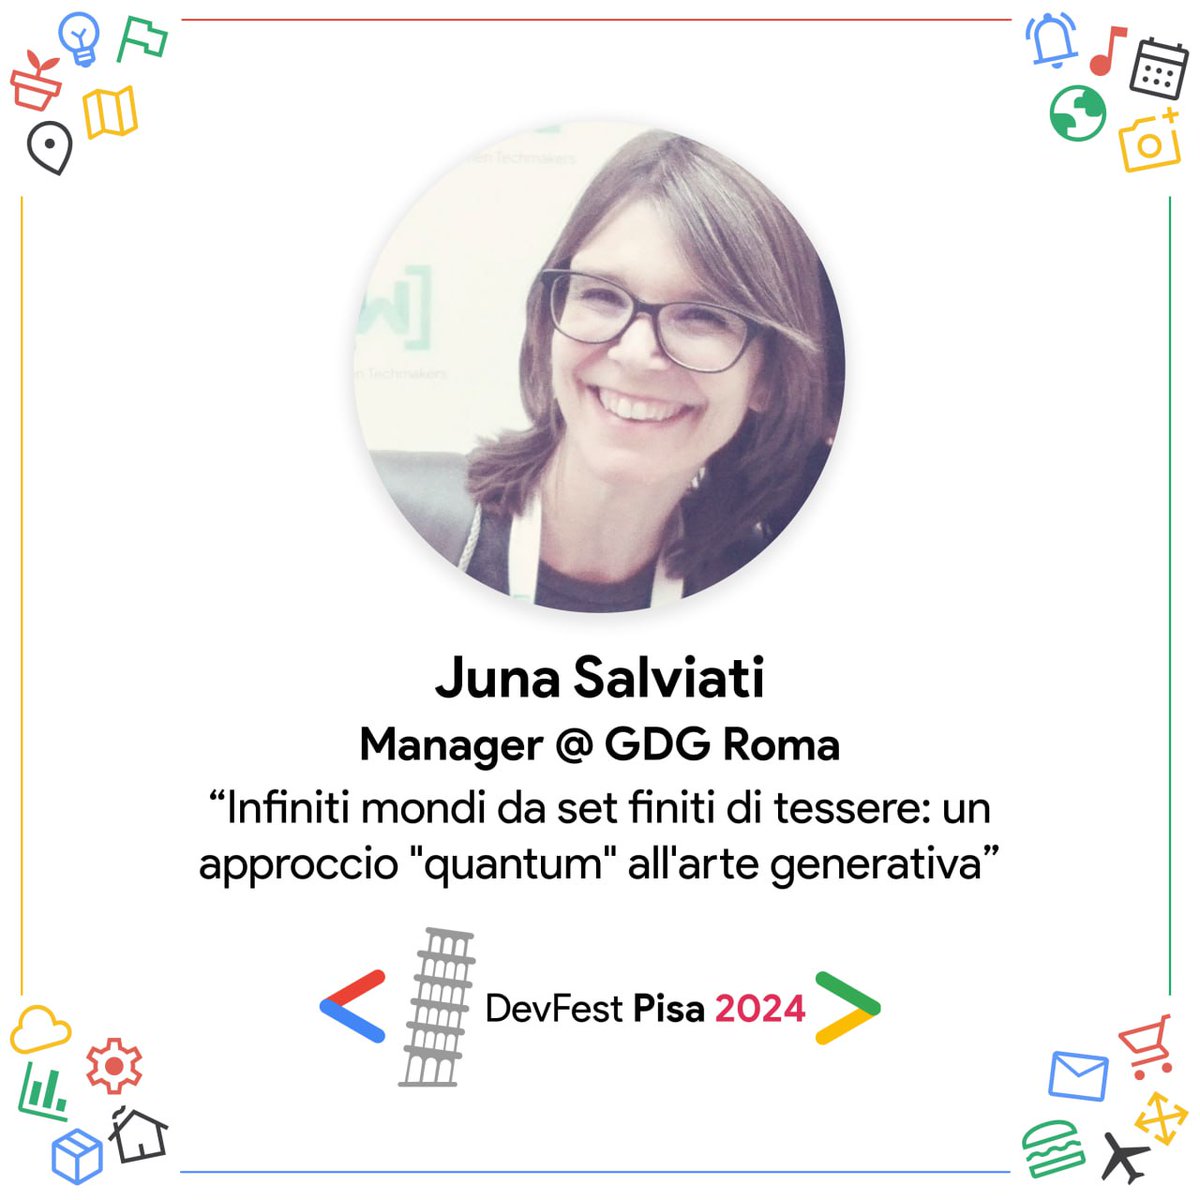 Heyla developers! 🚀
We are thrilled to introduce Juna Salviati as a speaker at DevFest Pisa 2024! 😍

If you haven’t gotten your ticket yet, hurry up! We are waiting for you. 🥰

Get your tickets for free: buff.ly/2thmu4F 🎟
#devfestpisa2024 #pisa #gdgpisa #wtmpisa